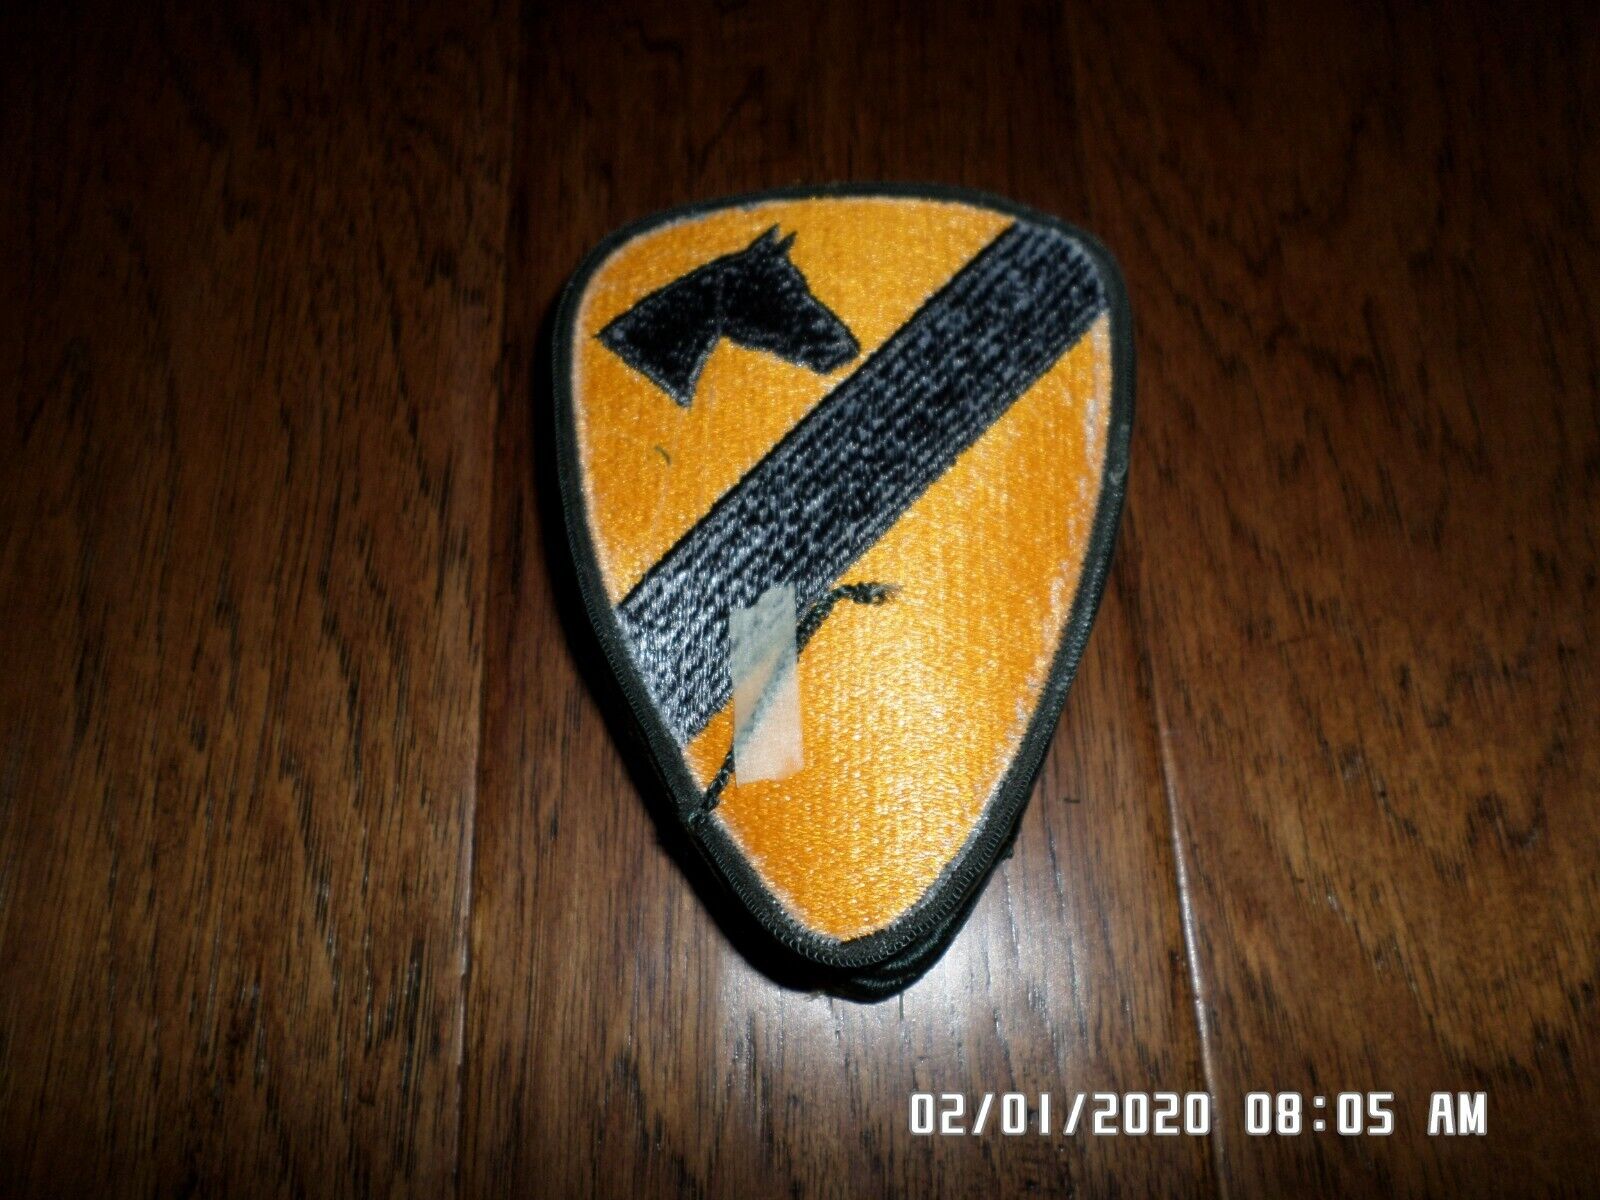 U.S ARMY 1ST CAVALRY DIVISION PATCH SHOULDER SLEEVE GENUINE MILITARY I –  Clay's Military